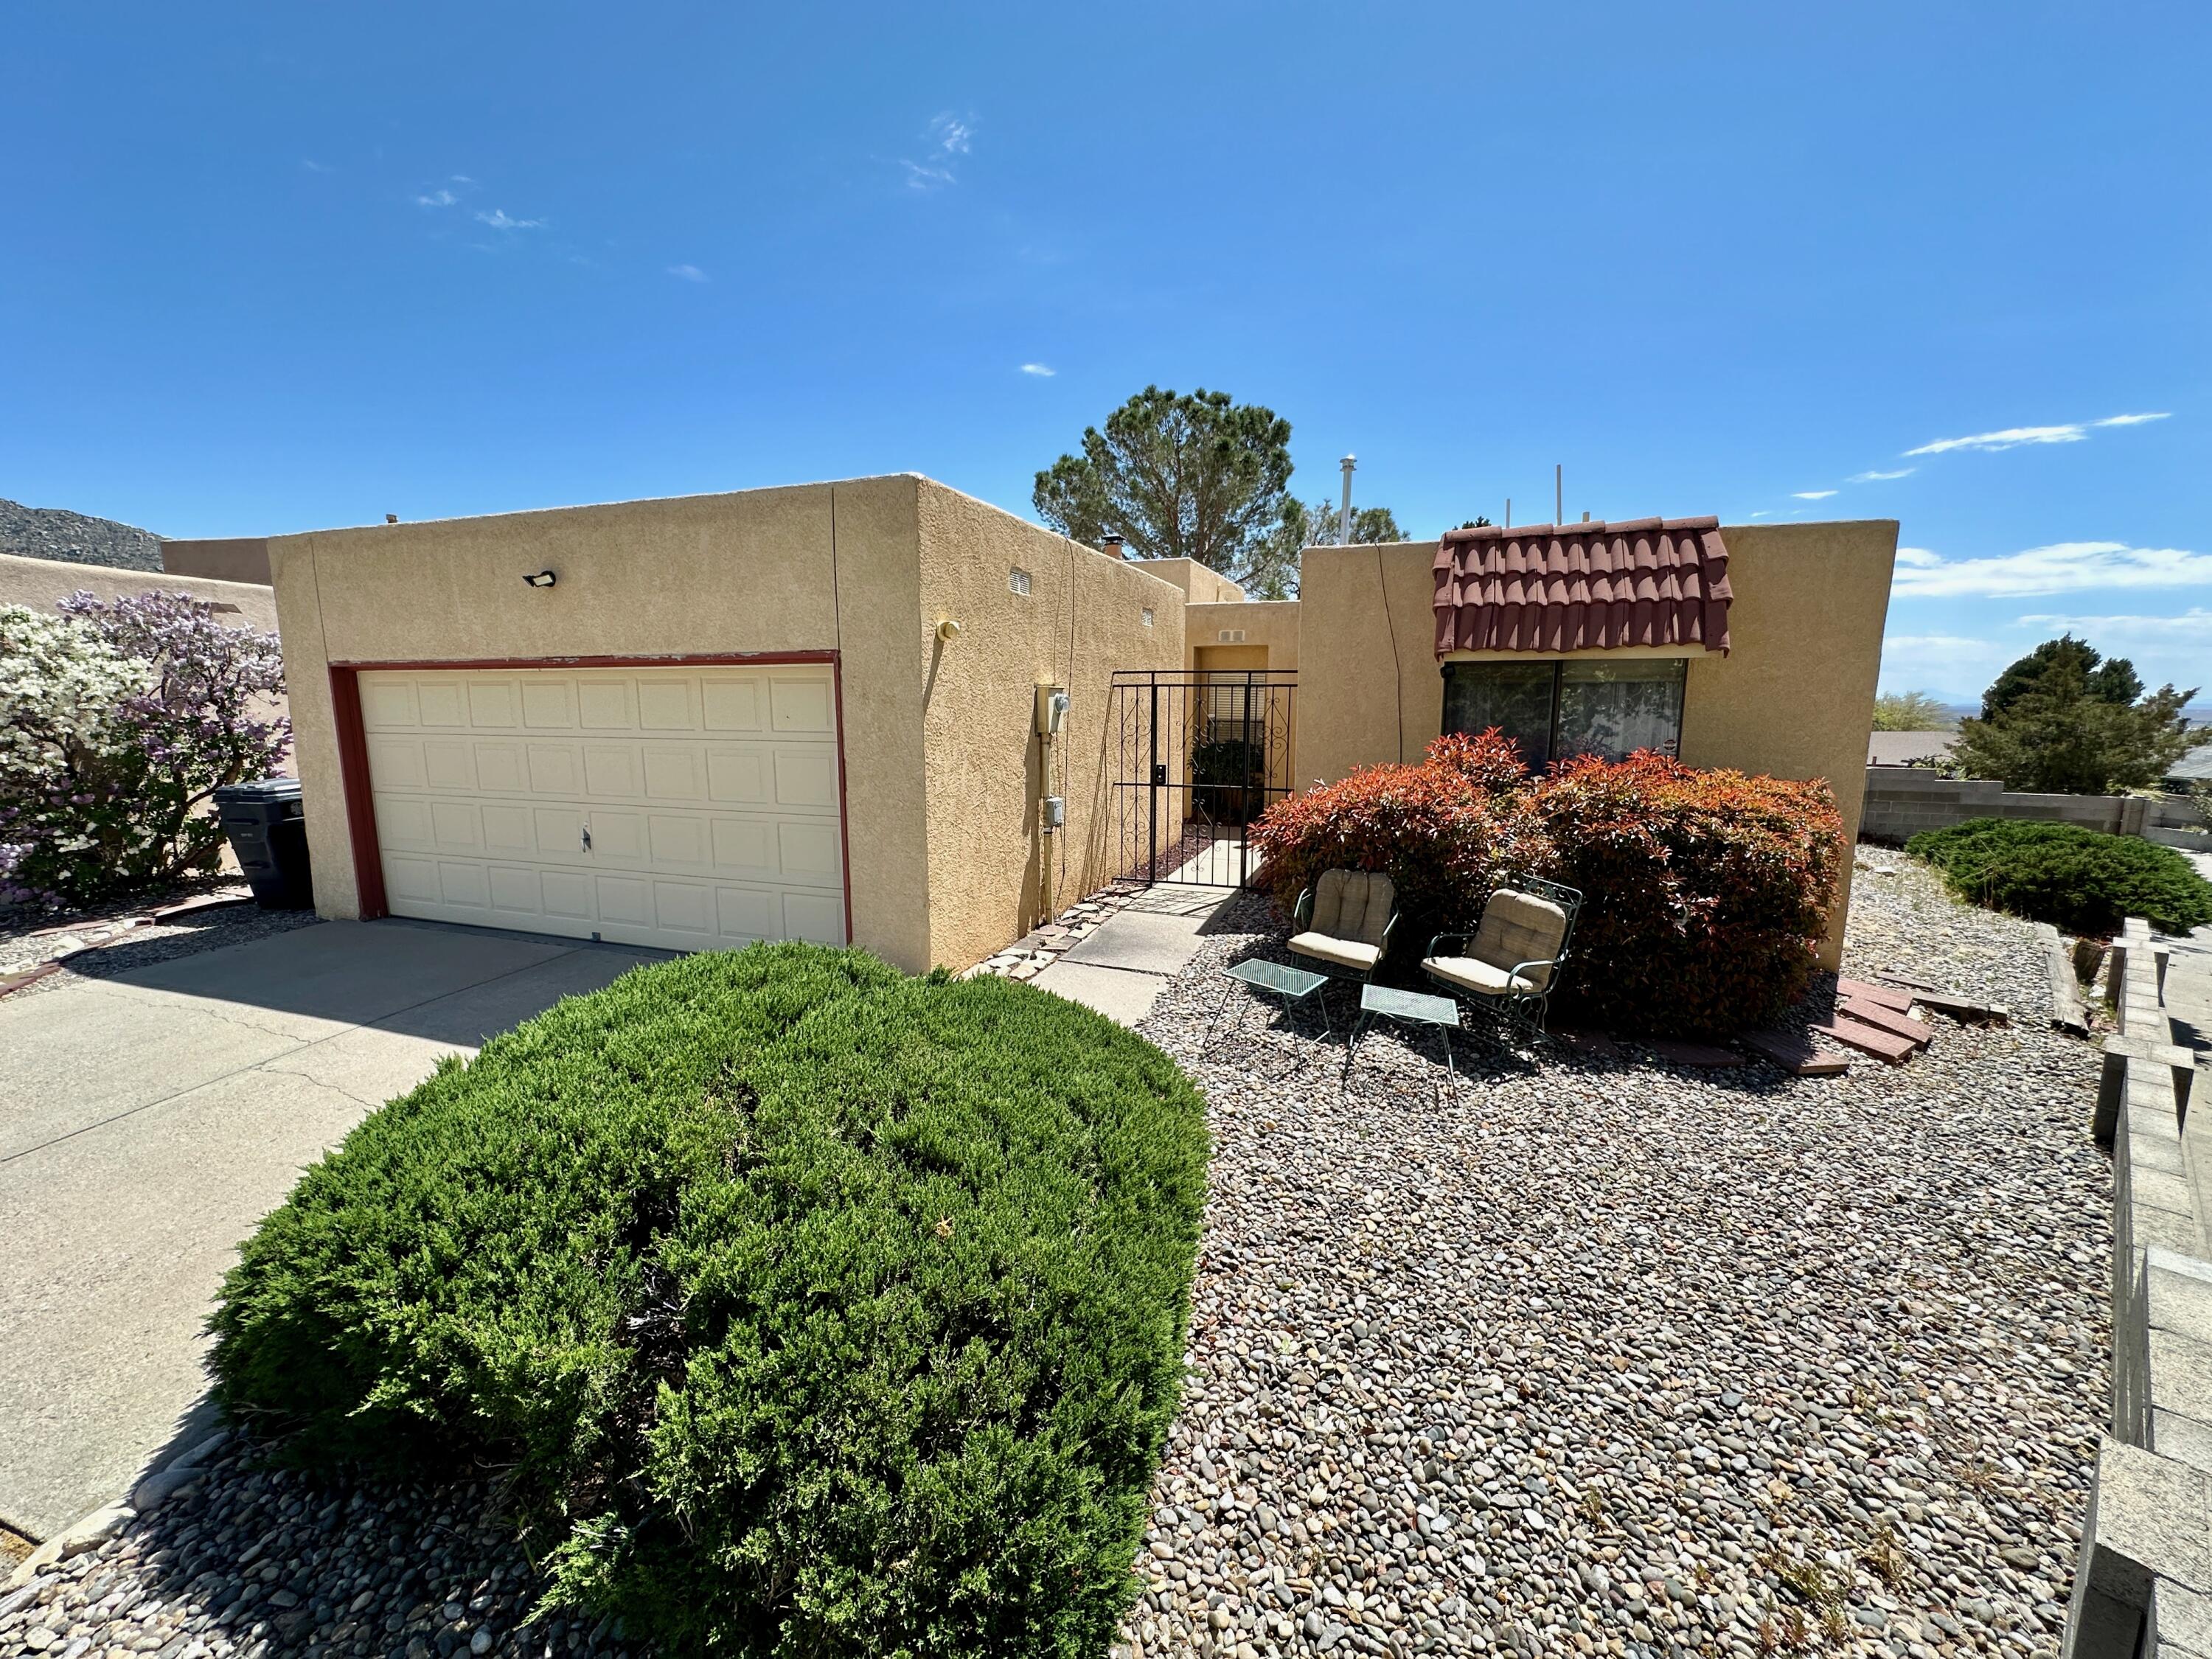 13100 Summer Place NE, Albuquerque, New Mexico 87112, 3 Bedrooms Bedrooms, ,2 BathroomsBathrooms,Residential,For Sale,13100 Summer Place NE,1061457